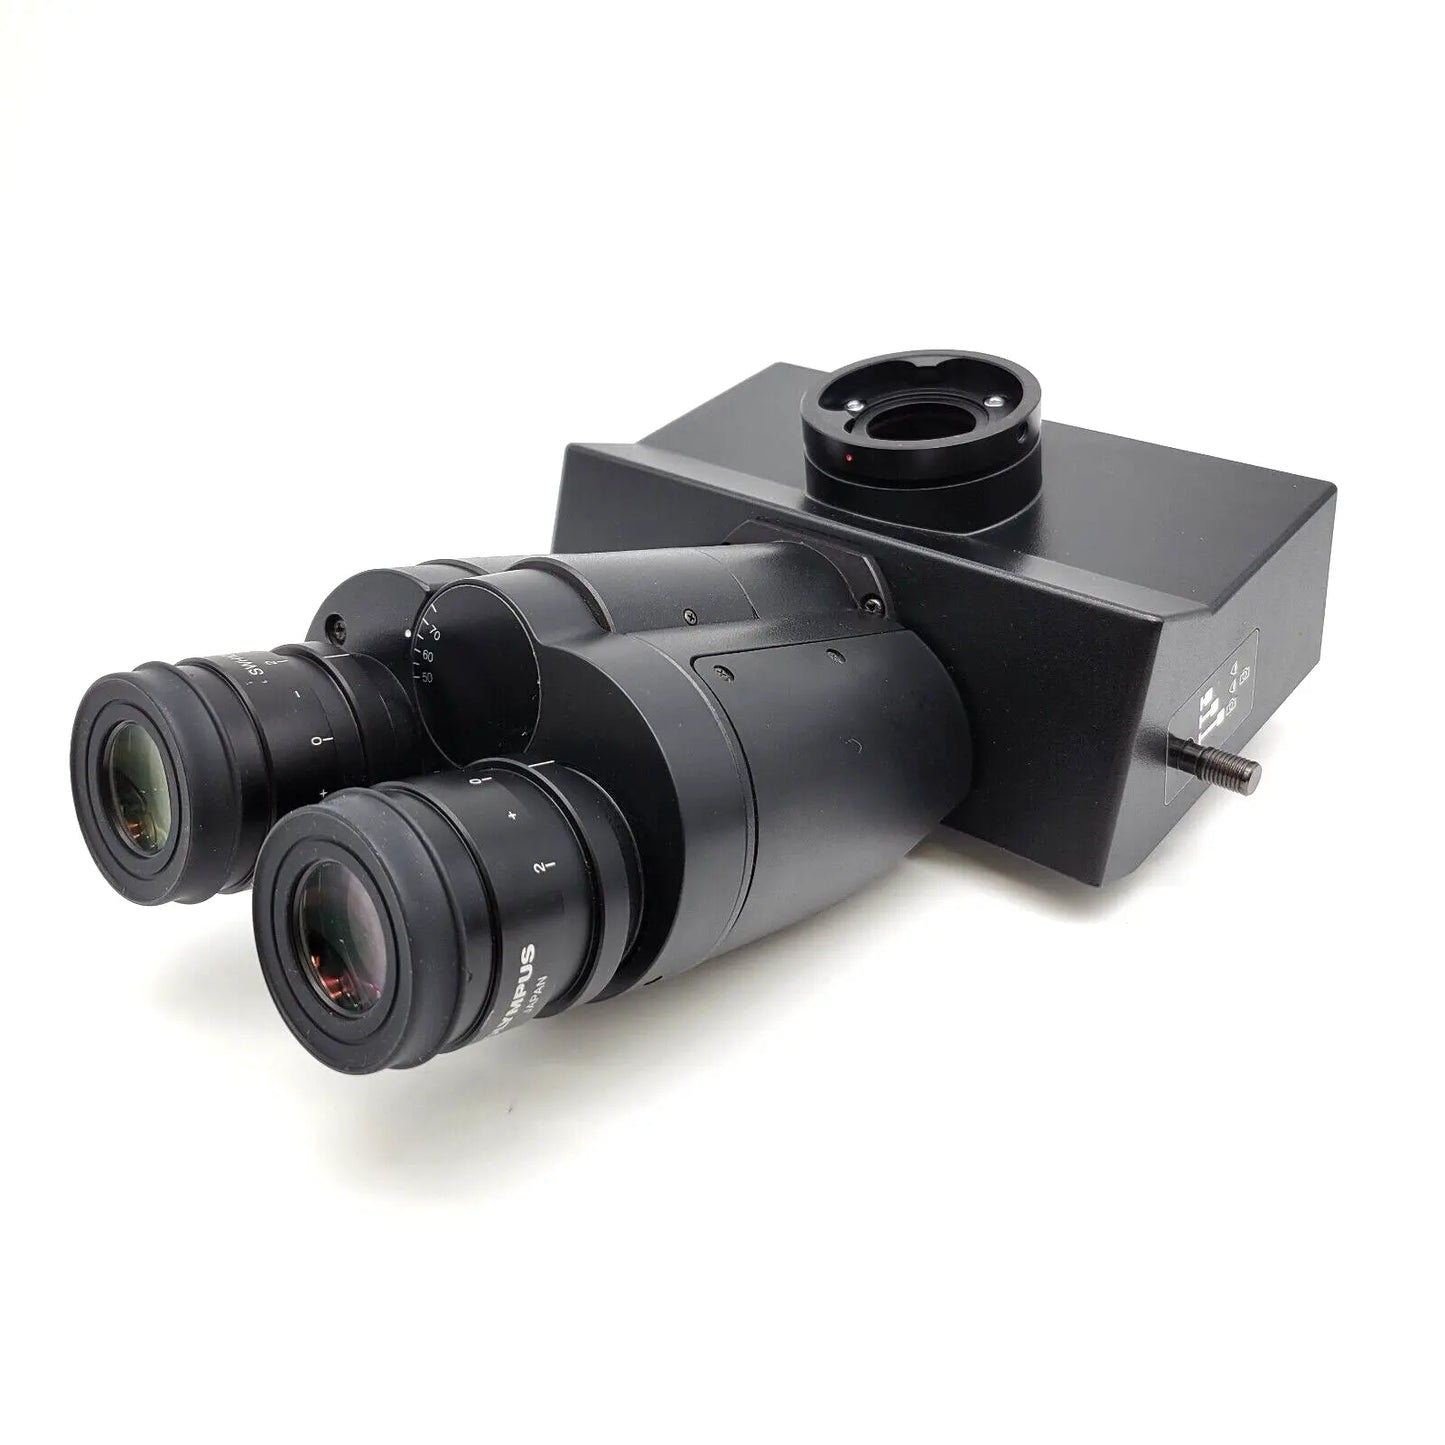 Olympus Microscope Super Wide Trinocular Head U-SWTR with Eyepieces SWH10x-H/26.5 Superwide - microscopemarketplace